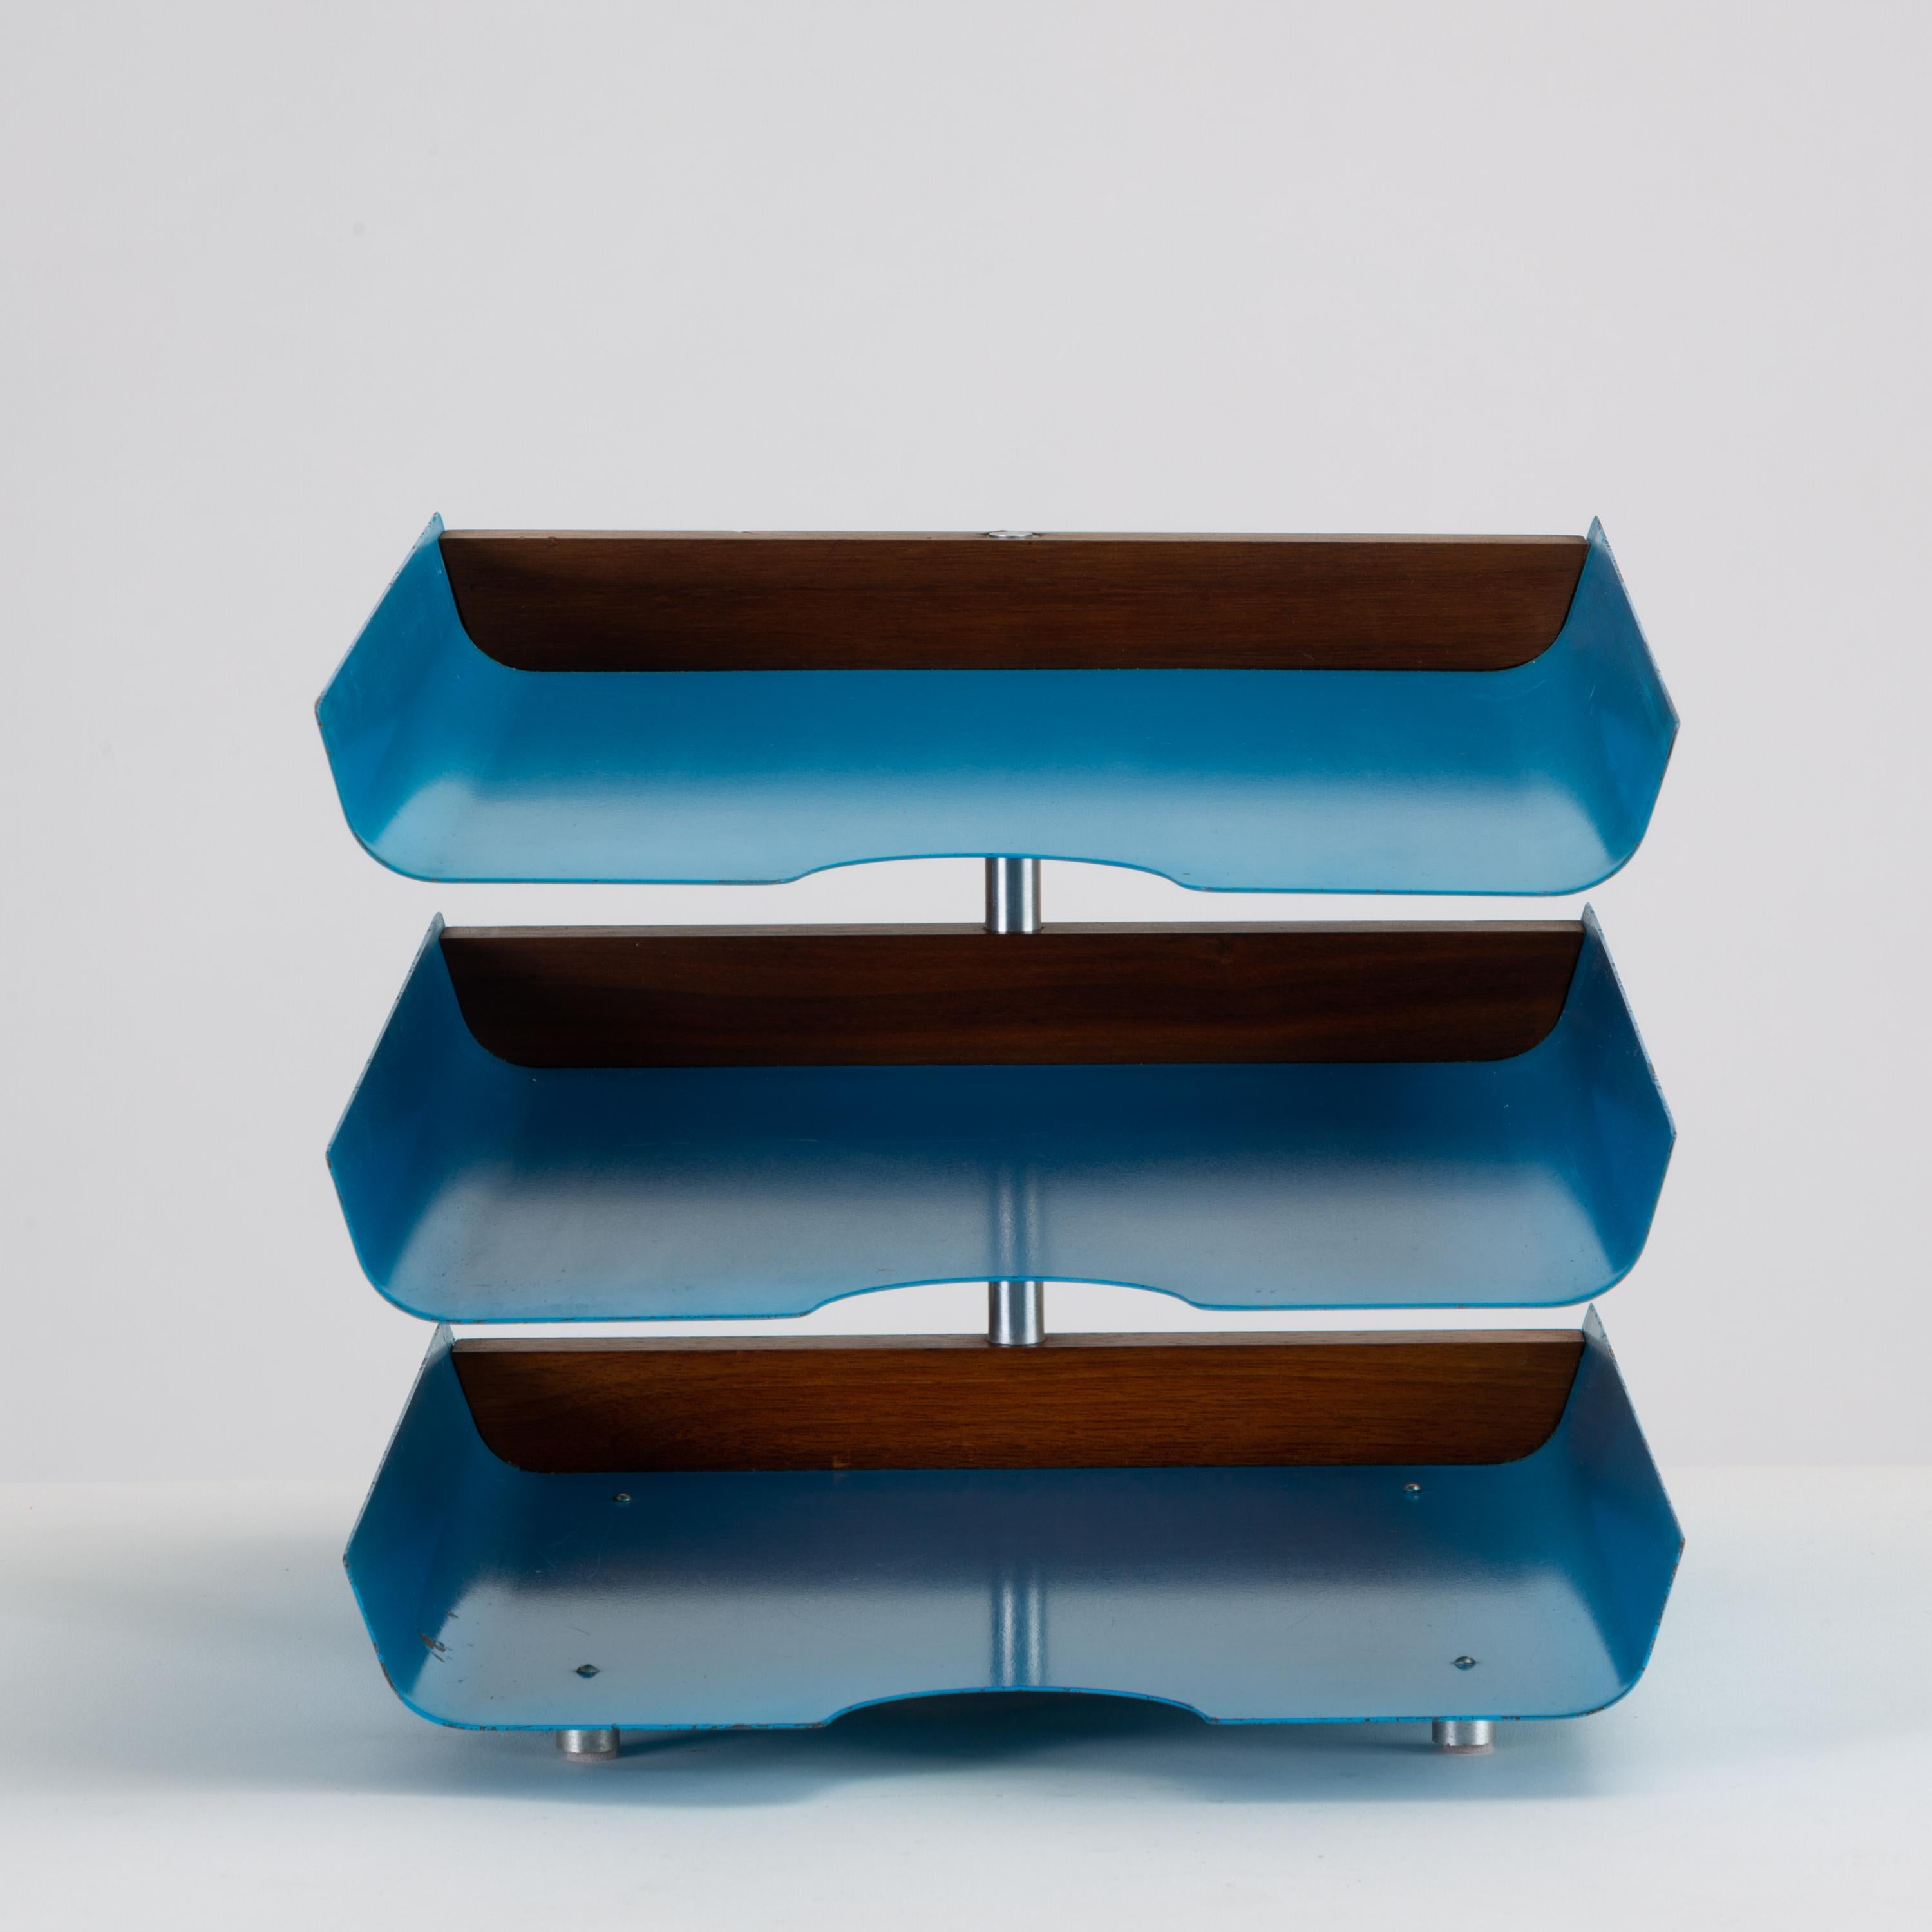 Peter Pepper Products three-tiered paper tray in original blue enamel.

A 1950s in/out tray for office or study has three tiers in enameled steel that rotate around a central post of brushed steel. Each drawer is a bright, cerulean blue, and the